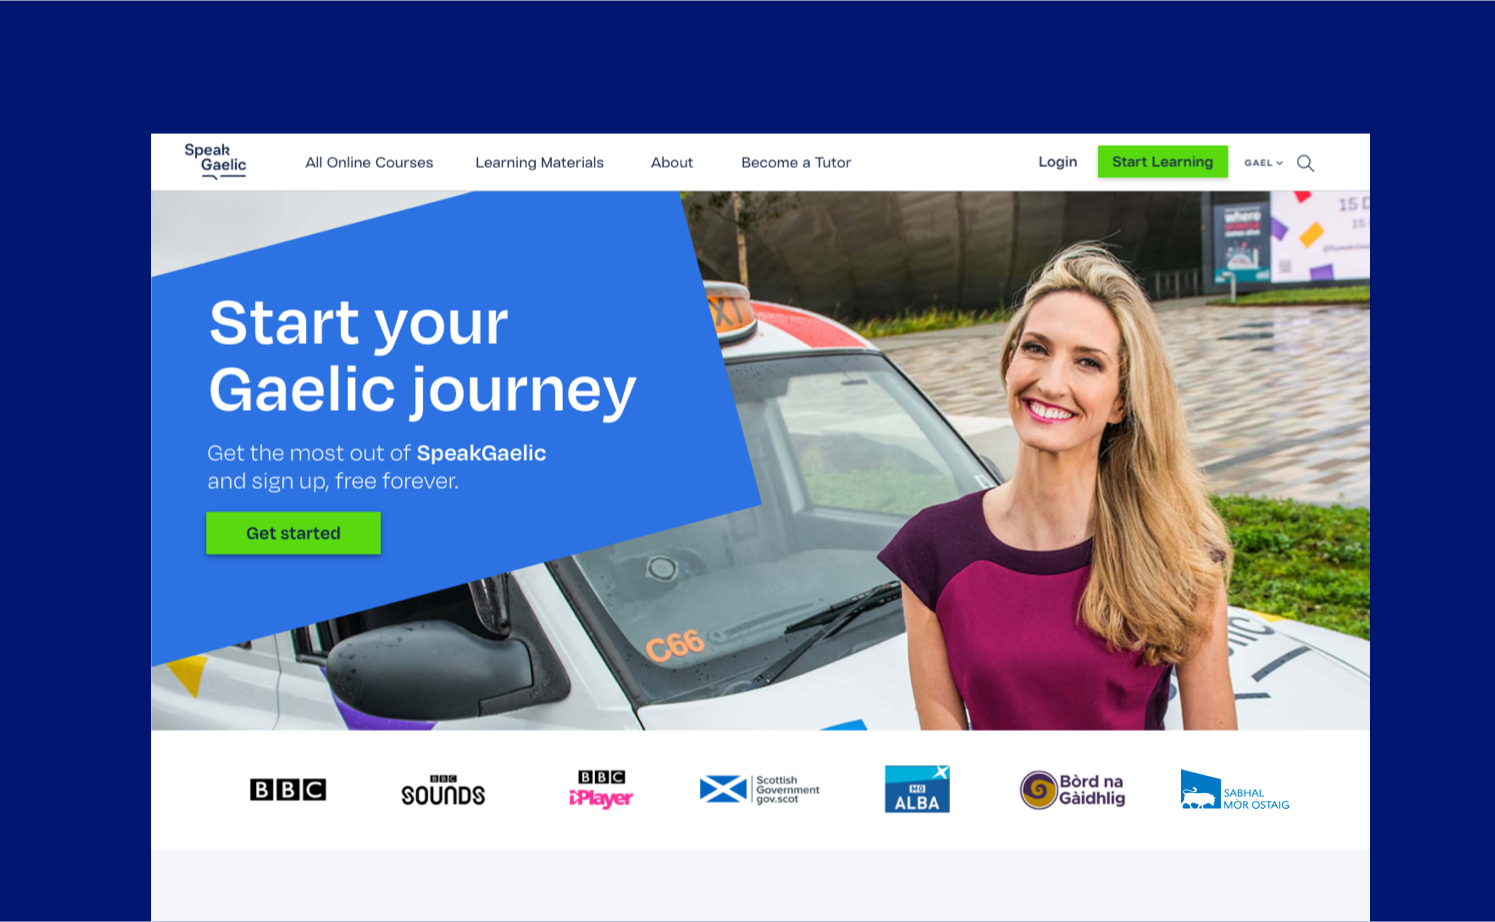 The SpeakGaelic homepage sits on a dark blue background. The SpeakGaelic homepage features Joy Dunlop and there is a large blue confetti piece stating “Start your Gaelic journey”. The SpeakGaelic partner logos are also featured.